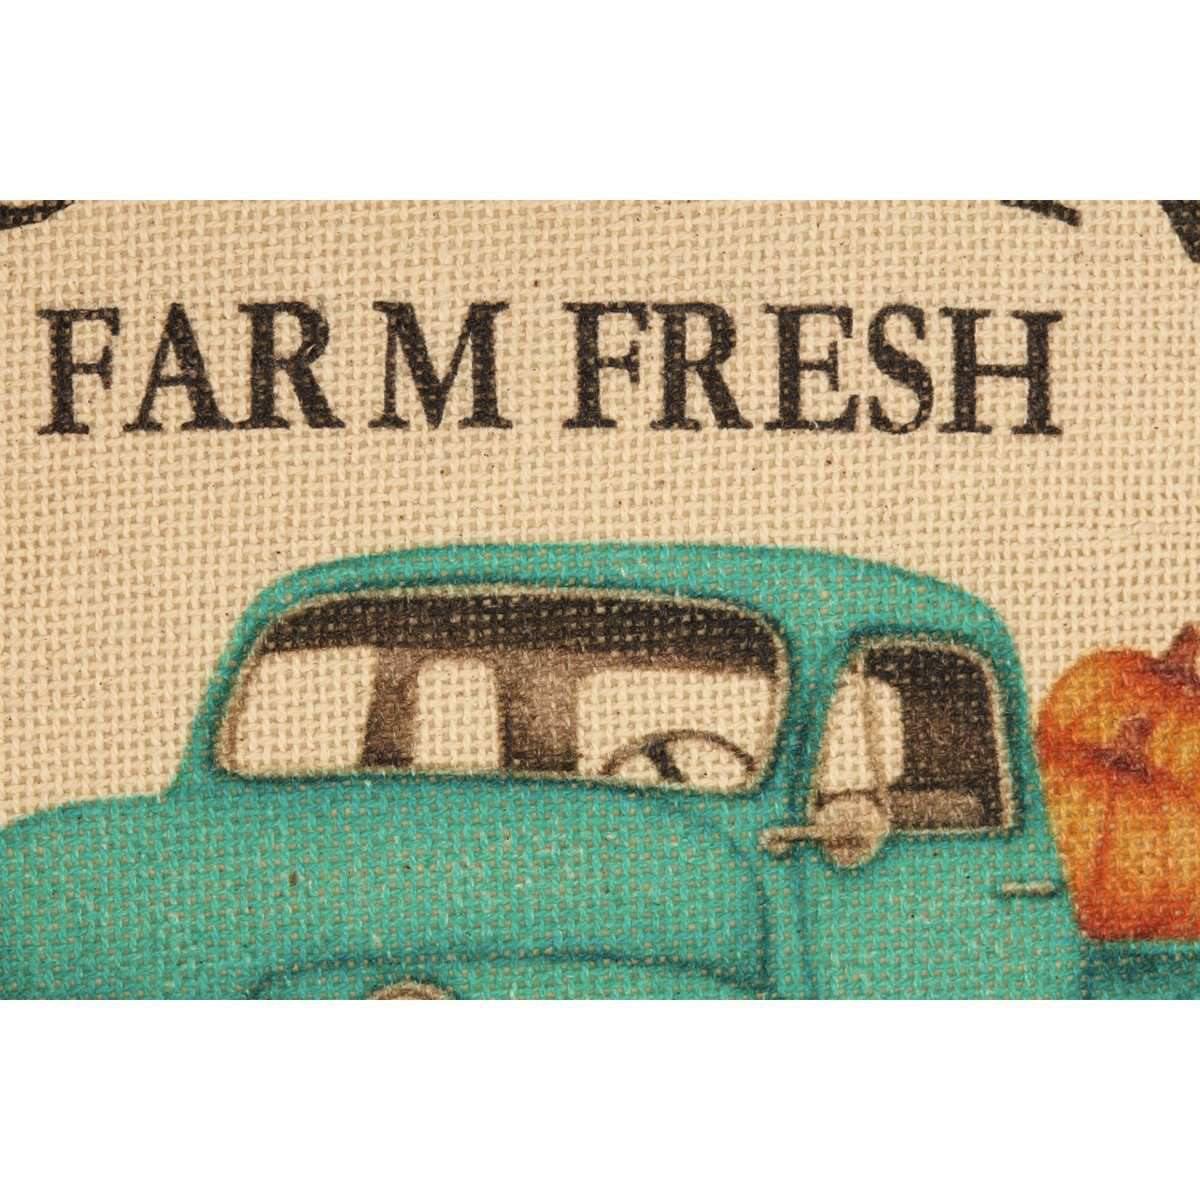 Fall on the Farm Truck Pillow 18x18 VHC Brands zoom